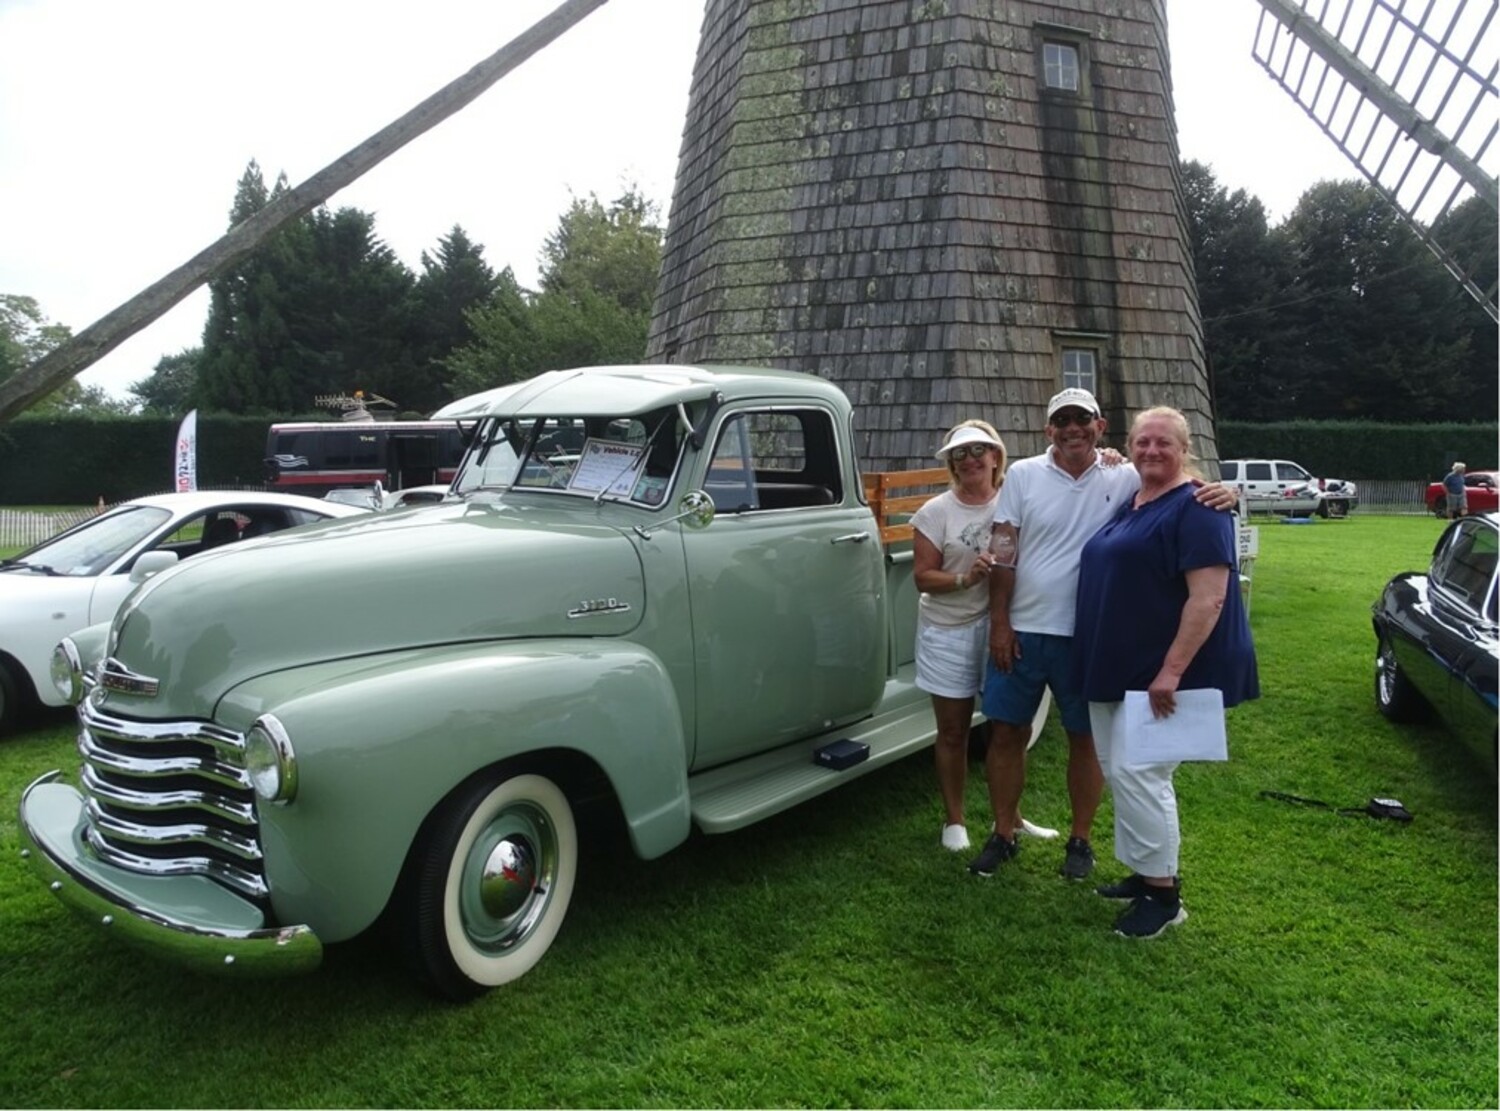 The 22nd annual Water Mill  Car Show on Saturday drew a record number of vehicles, 129, with more than 400 spectators walking through the gates to see them all. Spectators voted for the People's Choice and Jeff Cole and his 1953 Chevy Pick-up 3100 was the top pick. Also placing were  a 1926 Dodge Brothers Depot Hack Woody owned by John Berkoski with the second most votes; and a 1960 Corvette owned by Michael Kowalski. Thea Fry, chair of the event, which raises money for the Water Mill Village Improvement Association, presented the awards. COURTESY CINDY CORWITH